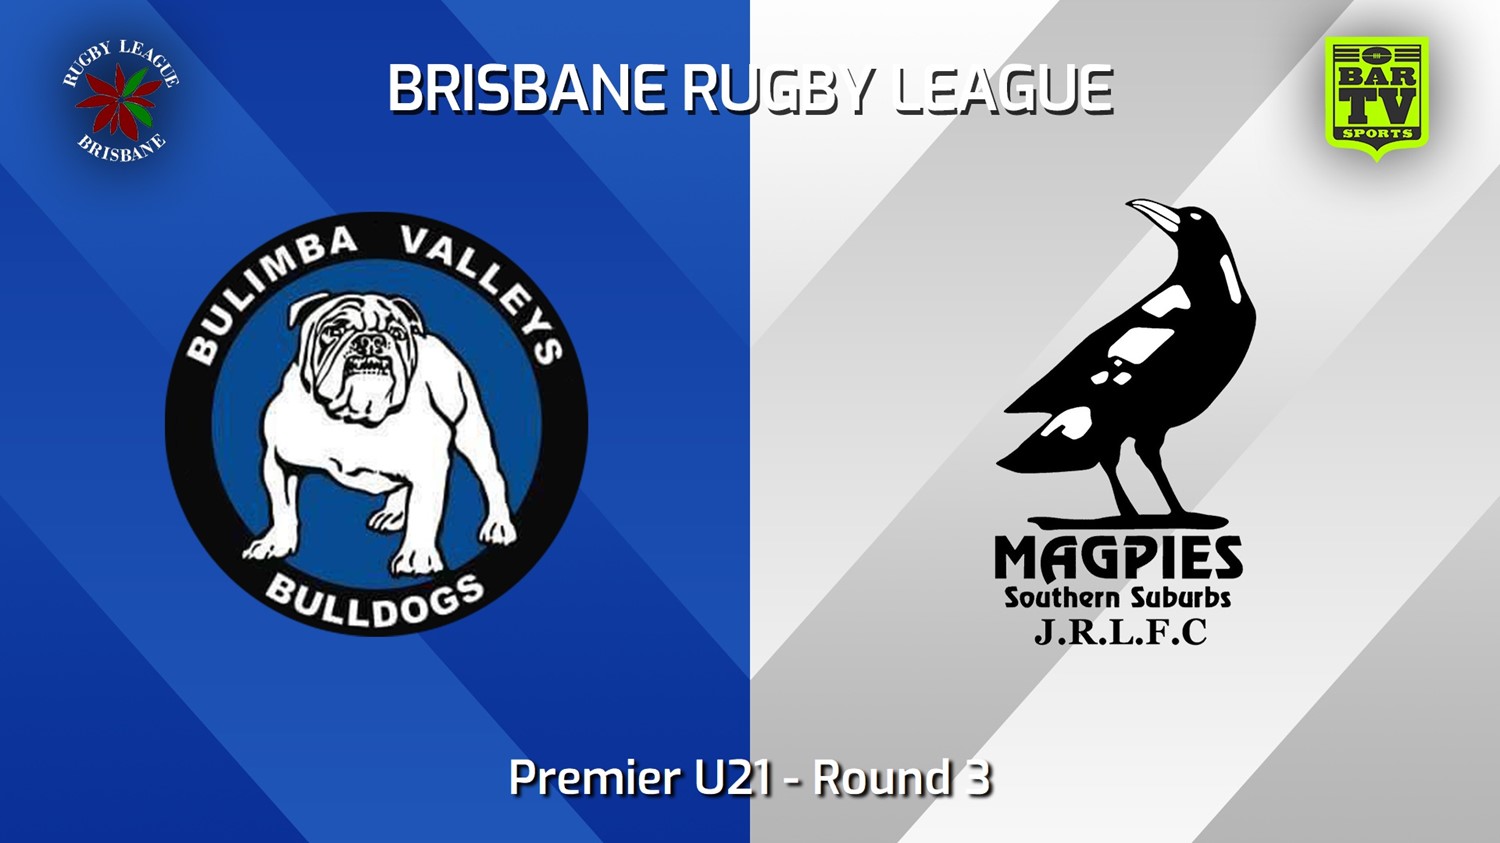 240420-video-BRL Round 3 - Premier U21 - Bulimba Valleys Bulldogs v Southern Suburbs Magpies Slate Image